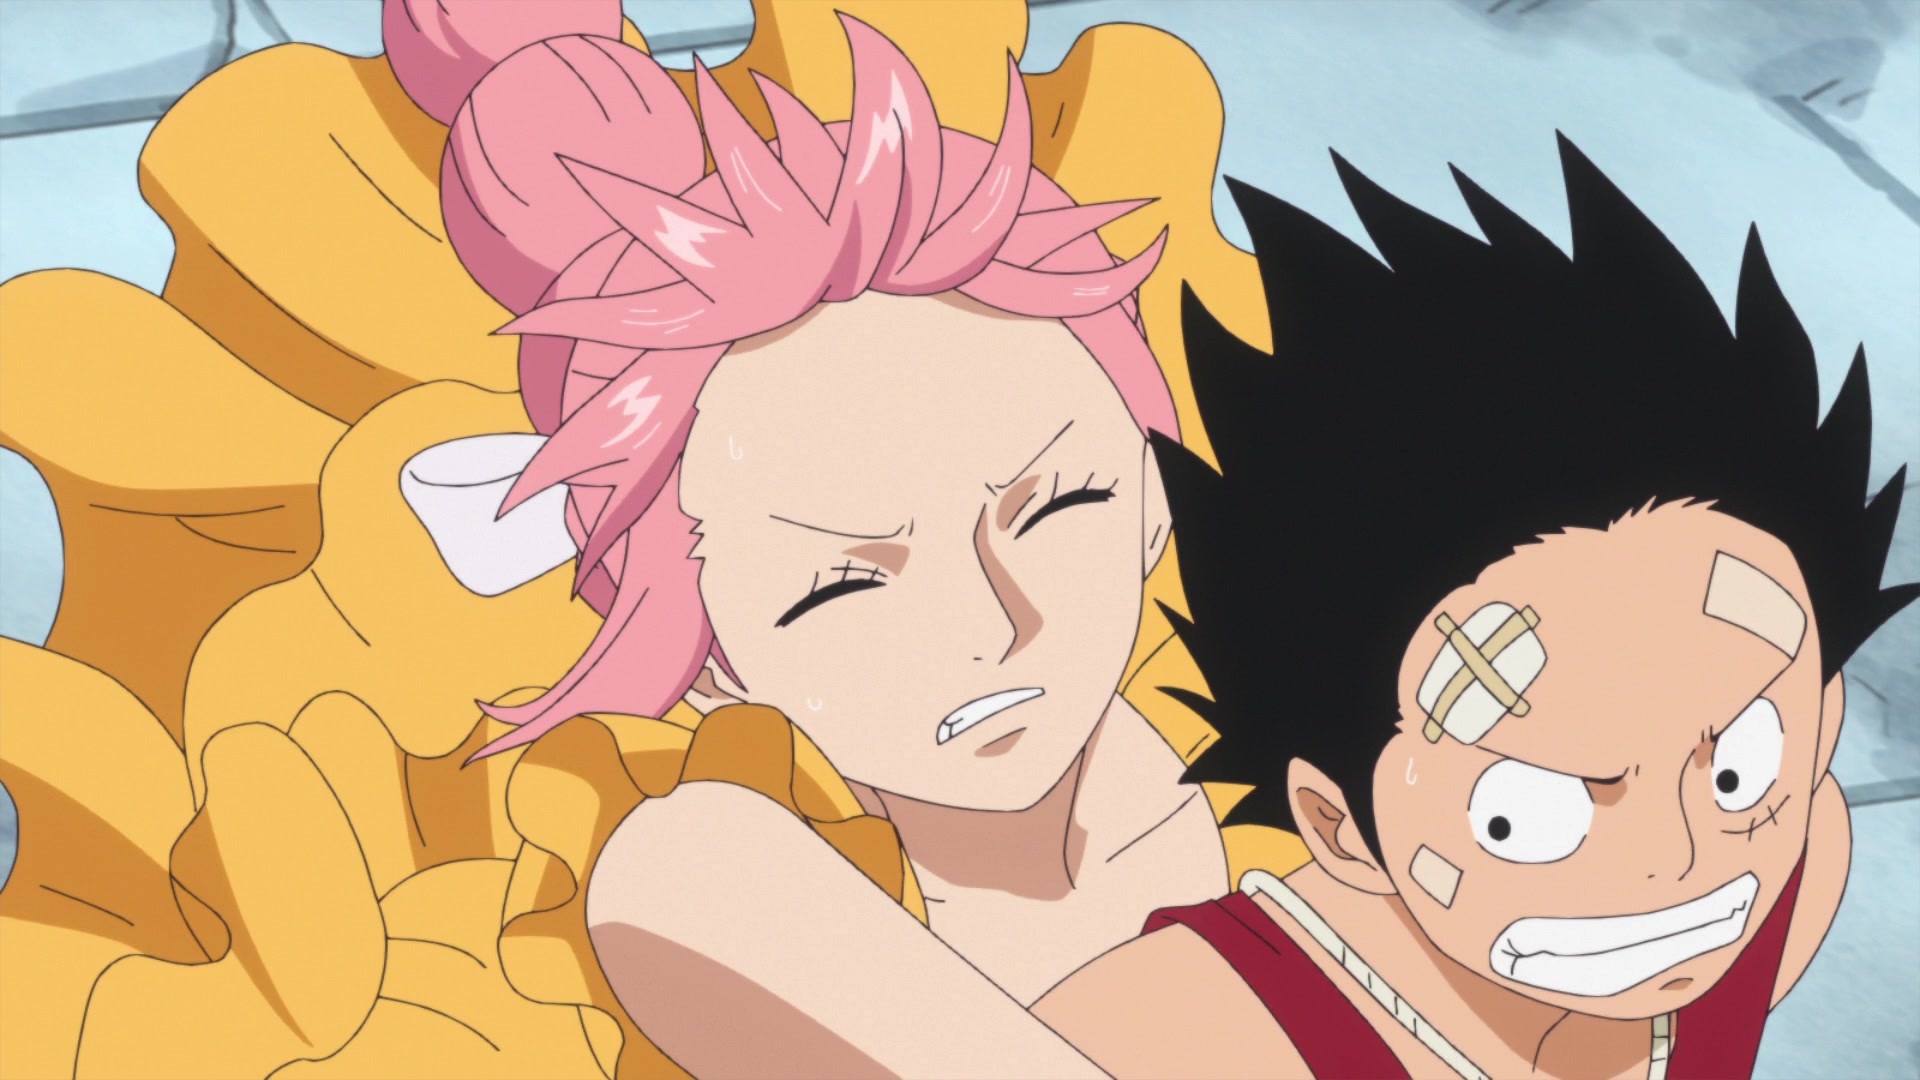 One Piece Dressrosa 700 746 Episode 742 The Bond Between Father And Daughter Kyros And Rebecca Watch On Crunchyroll